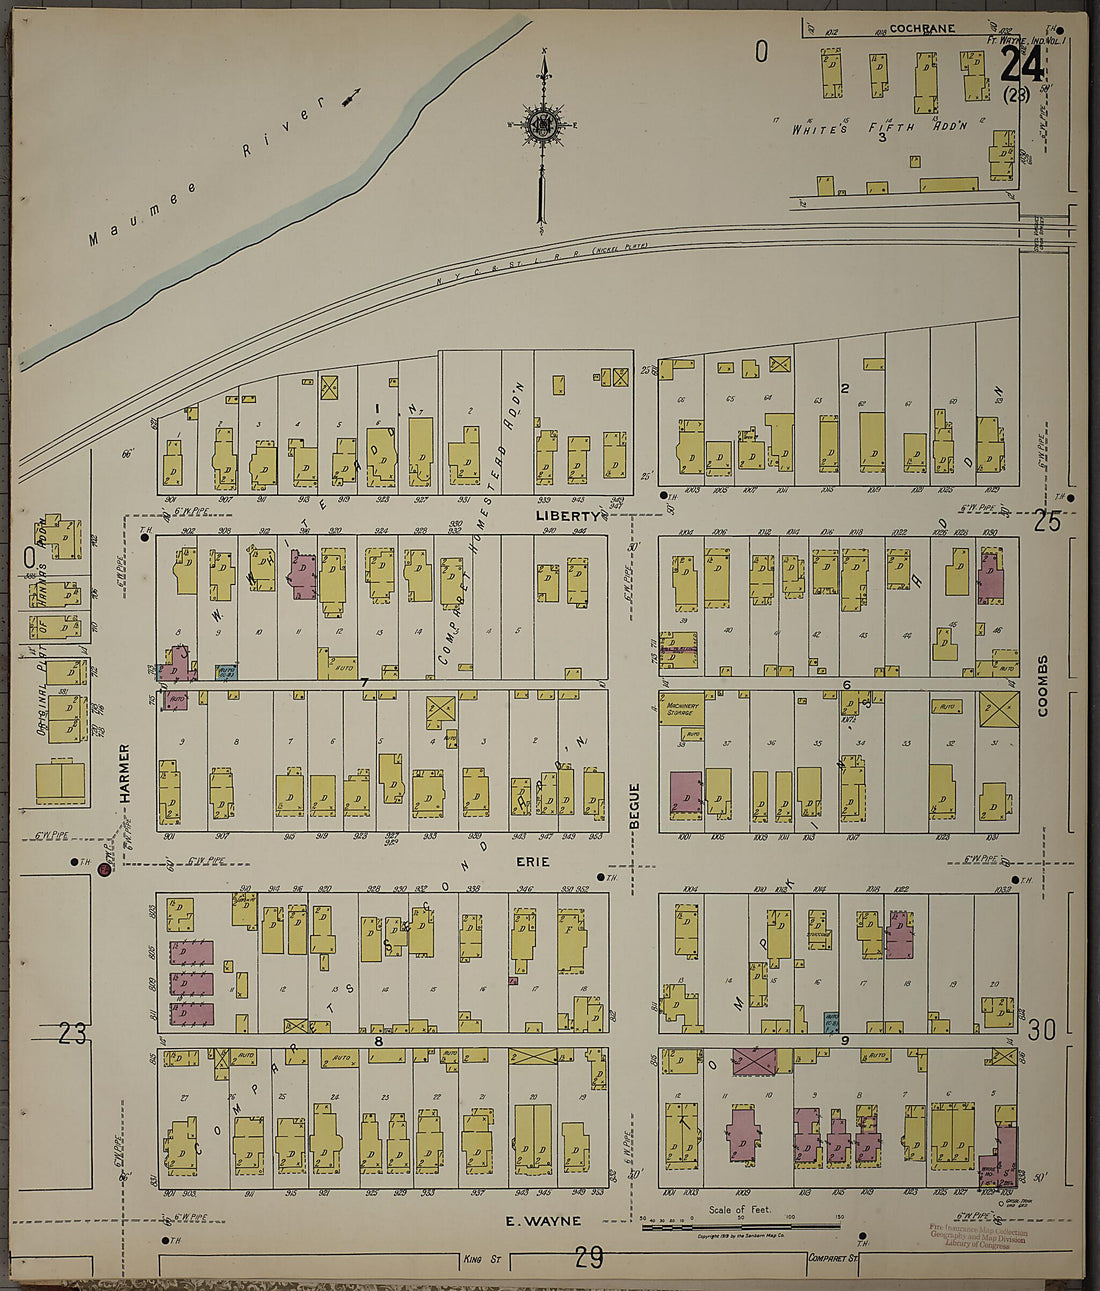 This old map of Fort Wayne, Allen County, Indiana was created by Sanborn Map Company in 1918